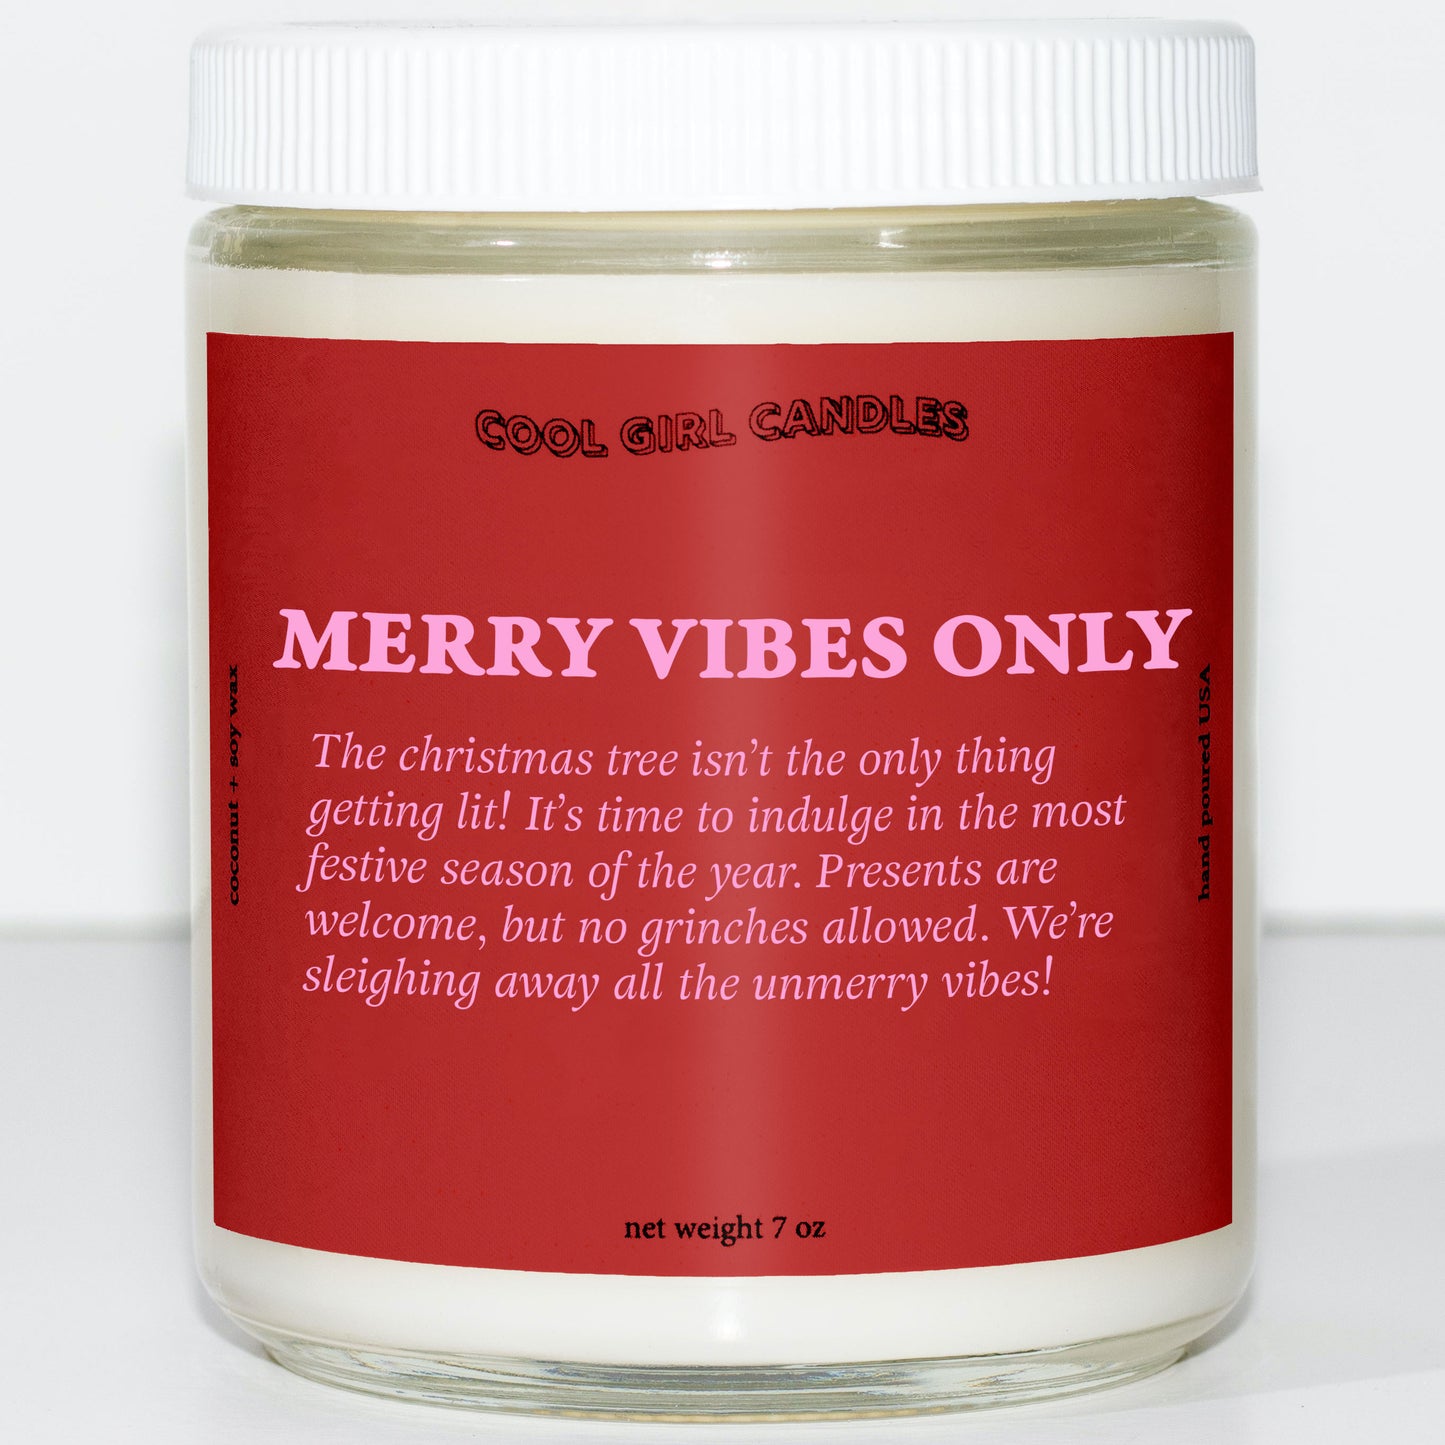 Merry vibes only holiday candle